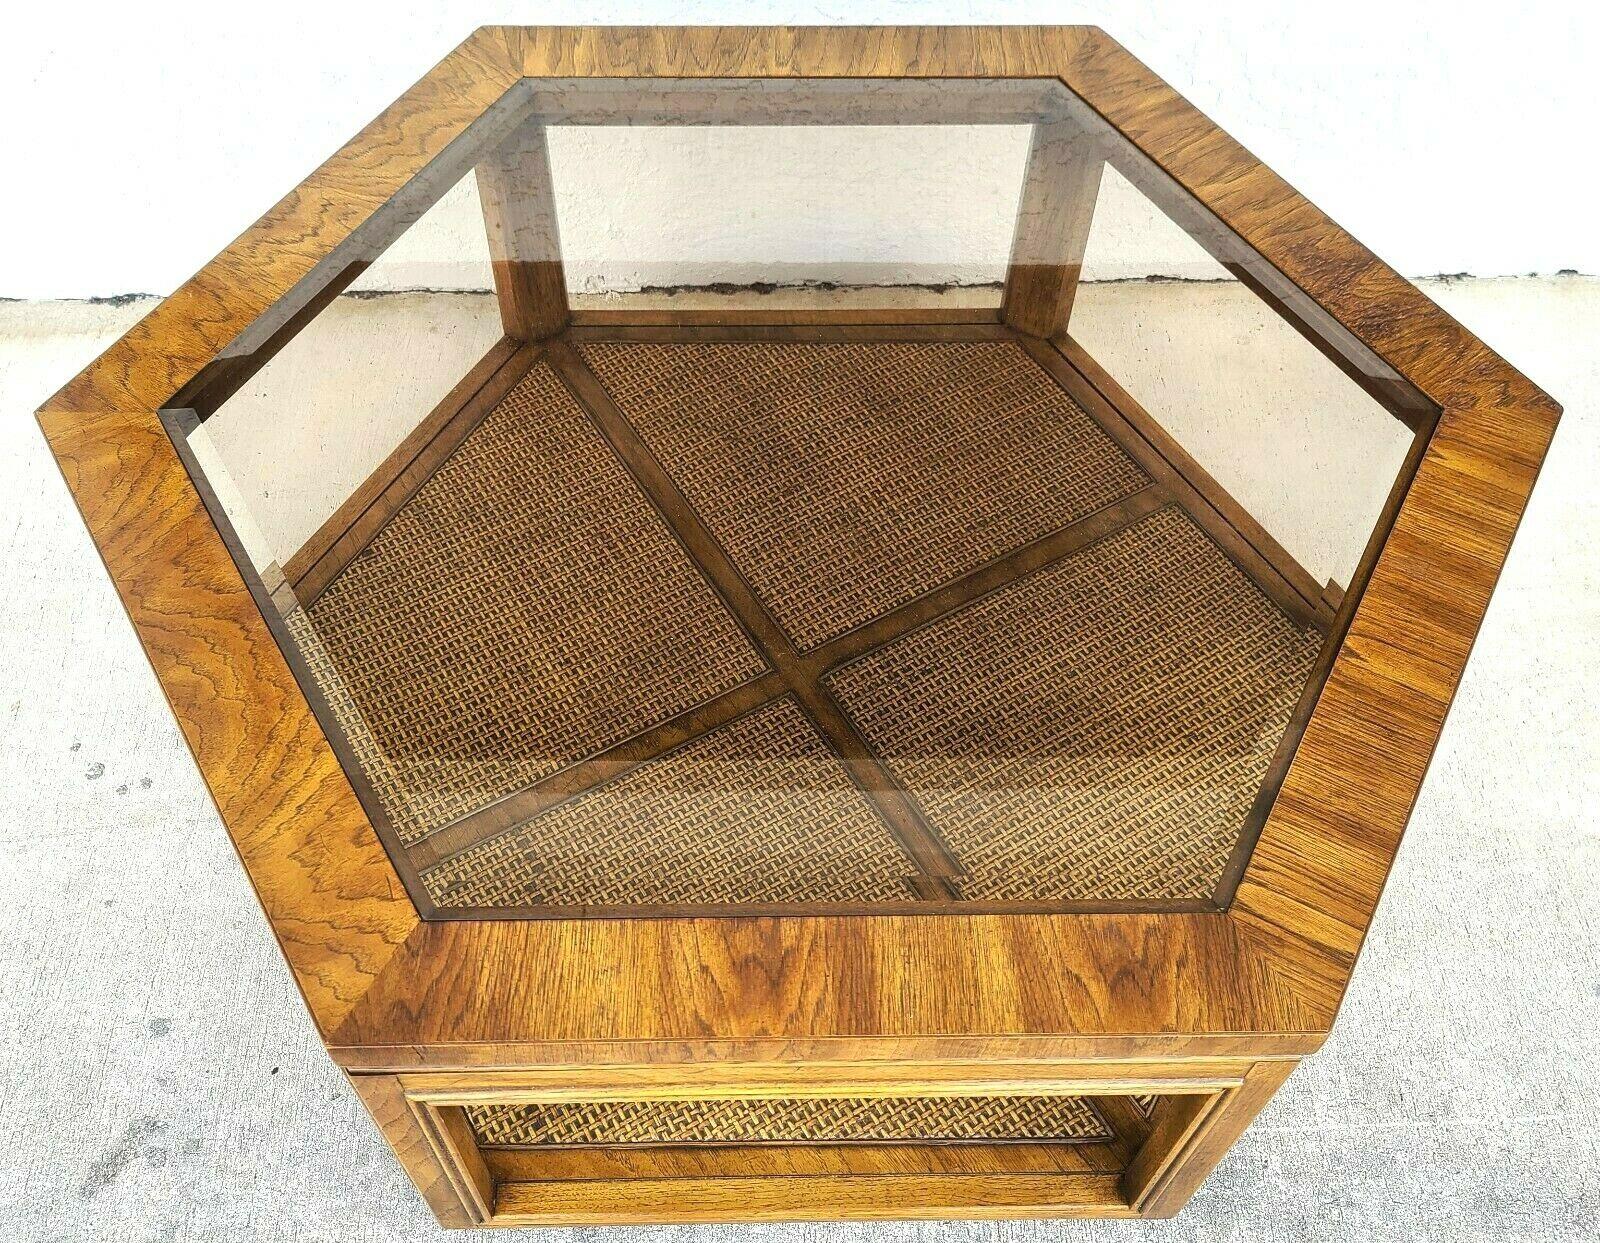 MCM Vintage Accolade Hexagonal glass Wicker coffee table by Drexel
Featuring a beveled glass top and wicker top on 1st tier.

Approximate measurements in inches
17